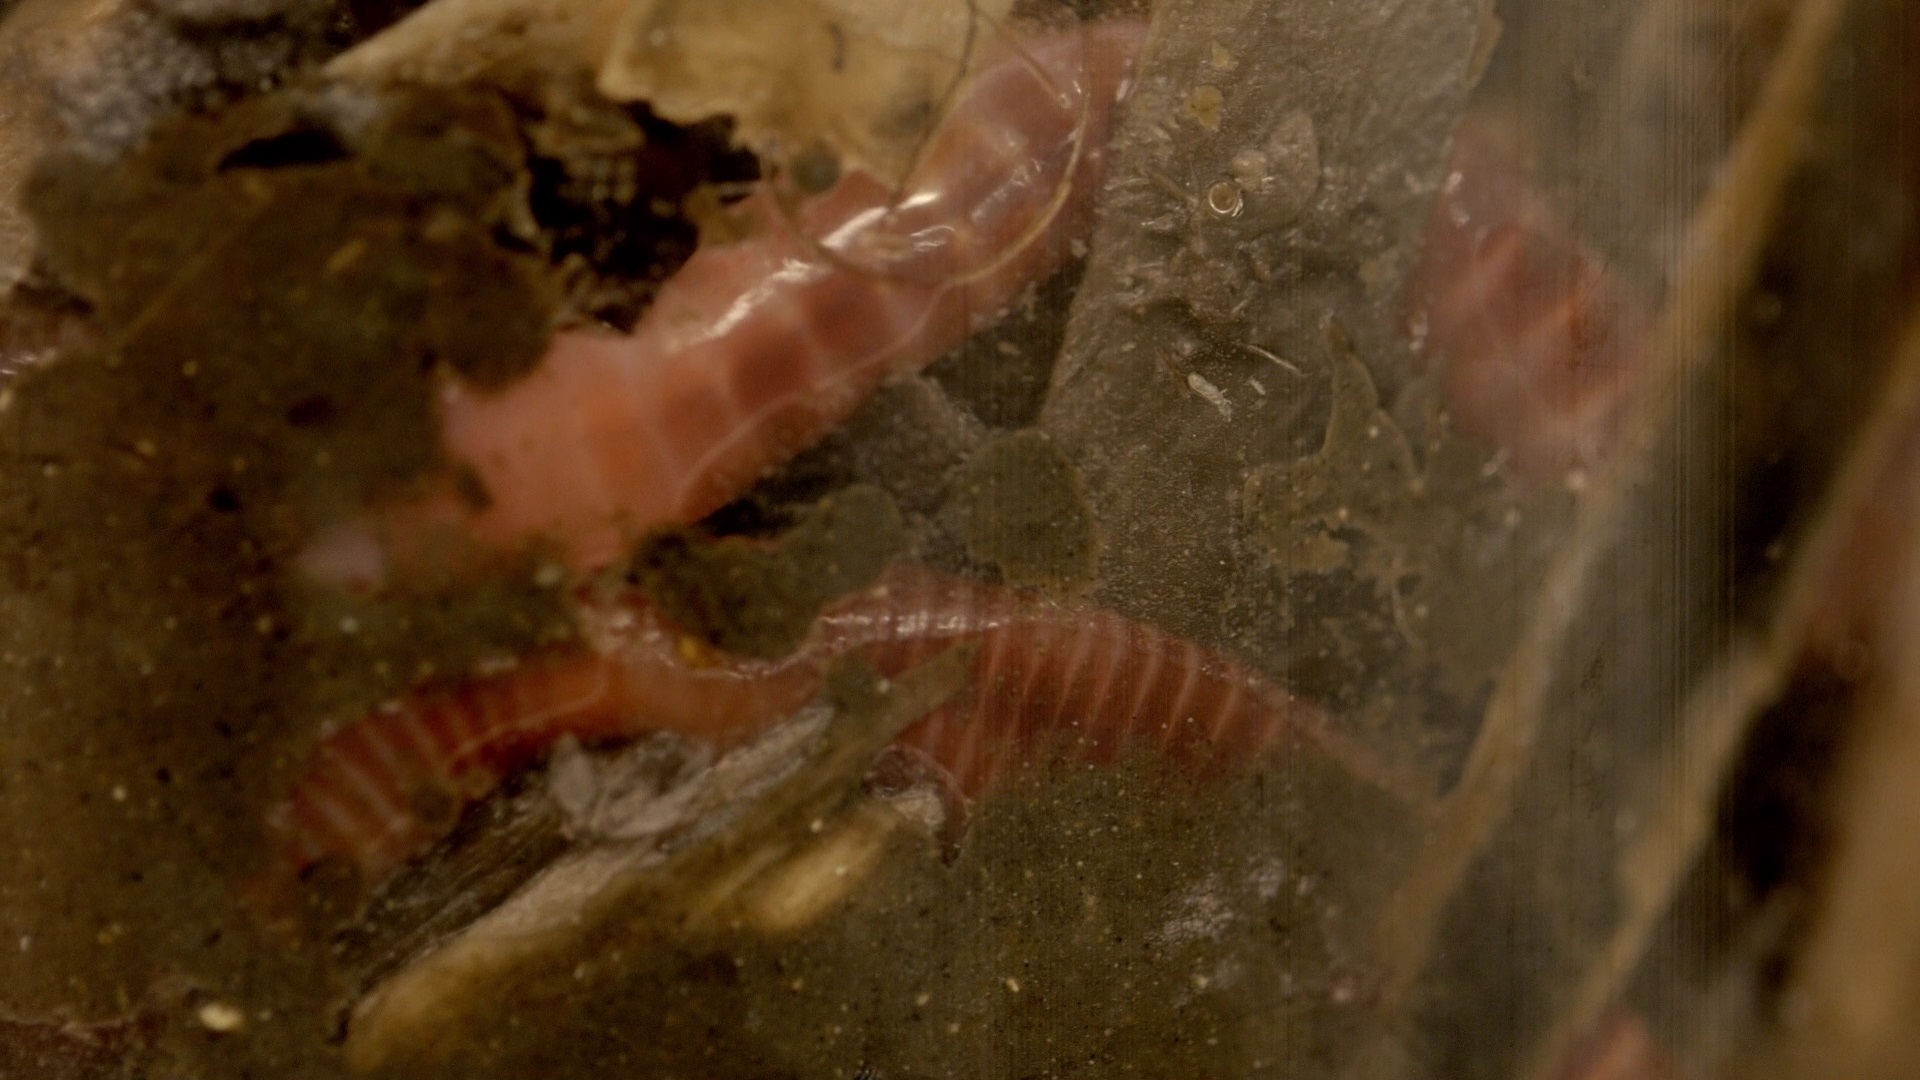 And finally...  Earthworms used to treat waste water as part of innovative study